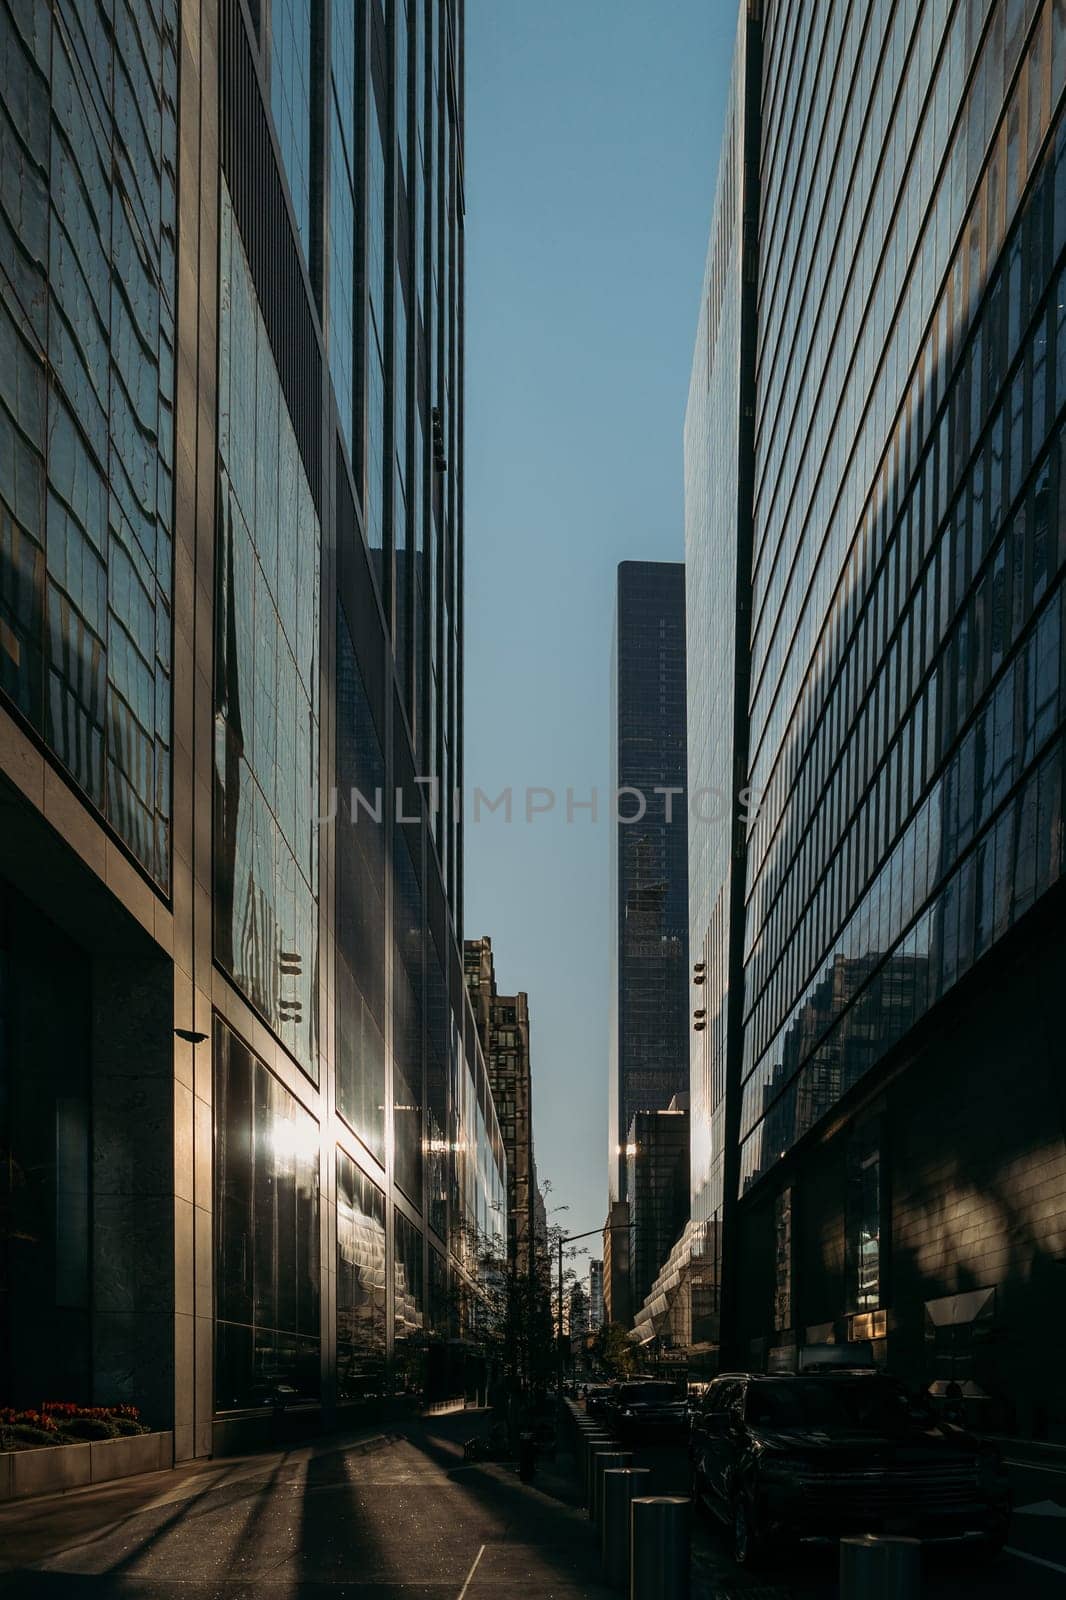 Shadowy New York Street Flanked by Modern Glass Skyscrapers by apavlin